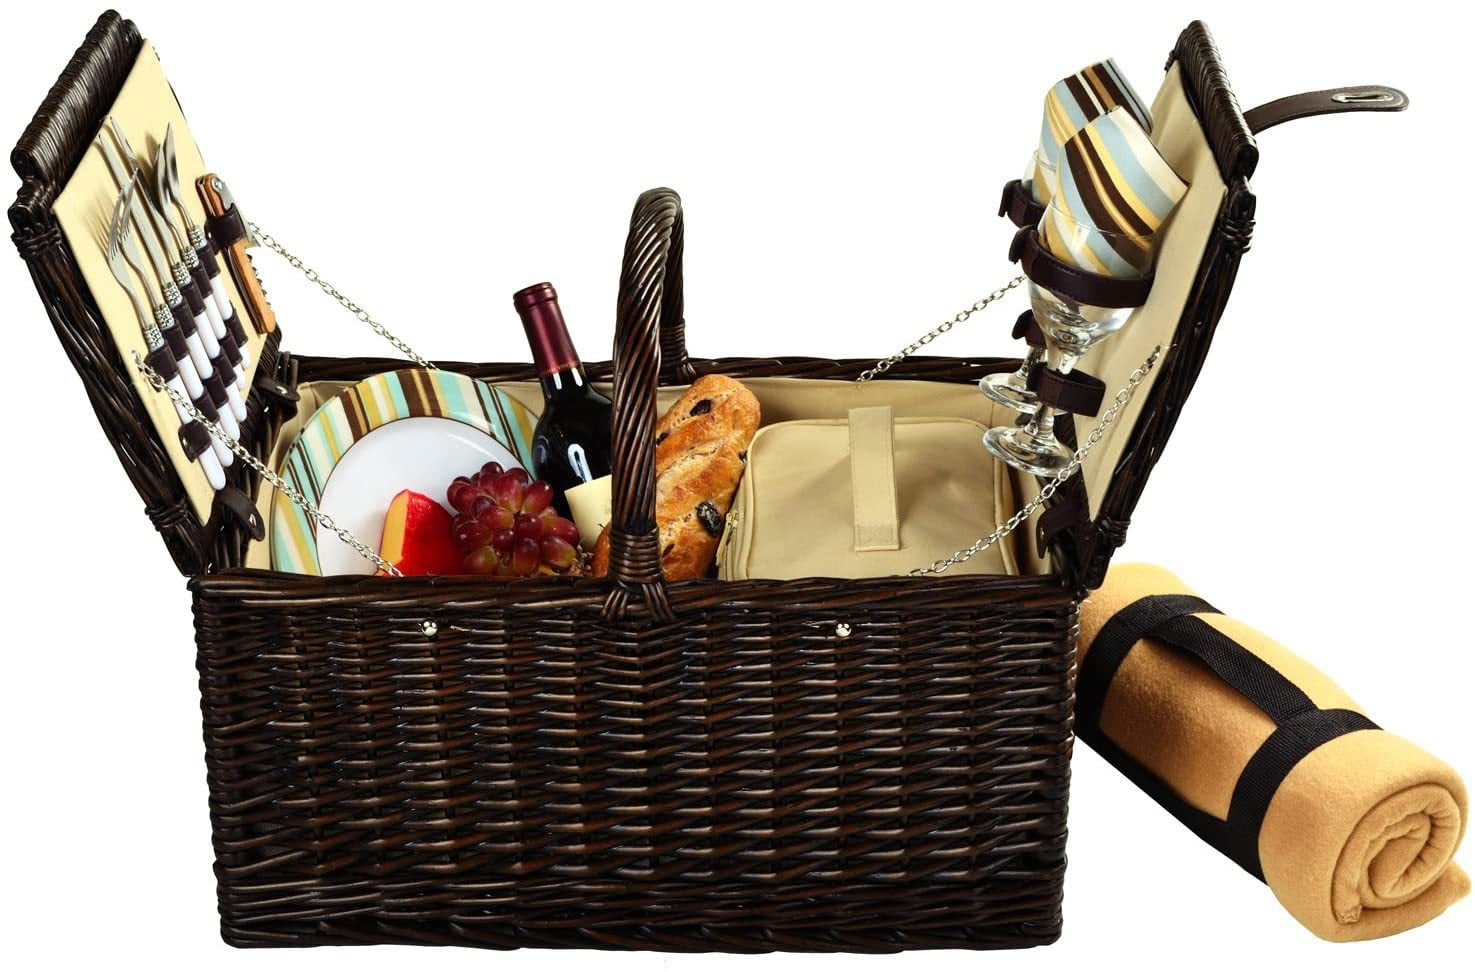 4 Person Picnic Basket Set with Blanket in Black | Buy ...